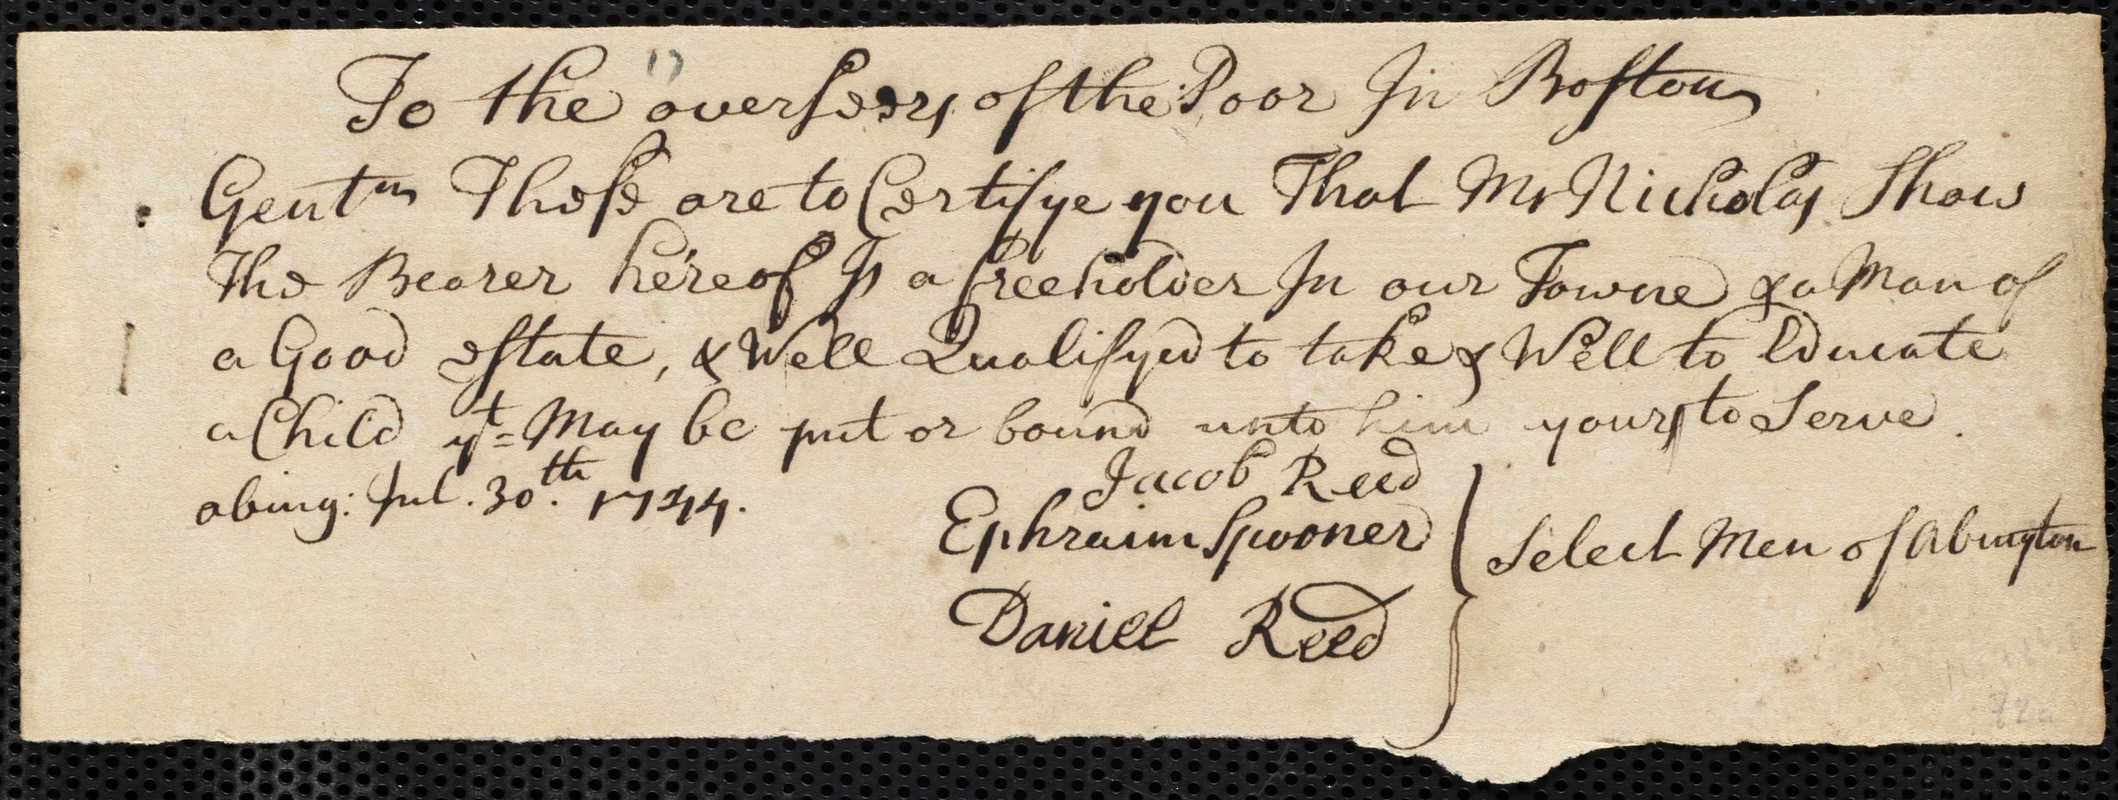 Josiah Baker indentured to apprentice with Nicholas Shaw of Abington, 1 August 1744